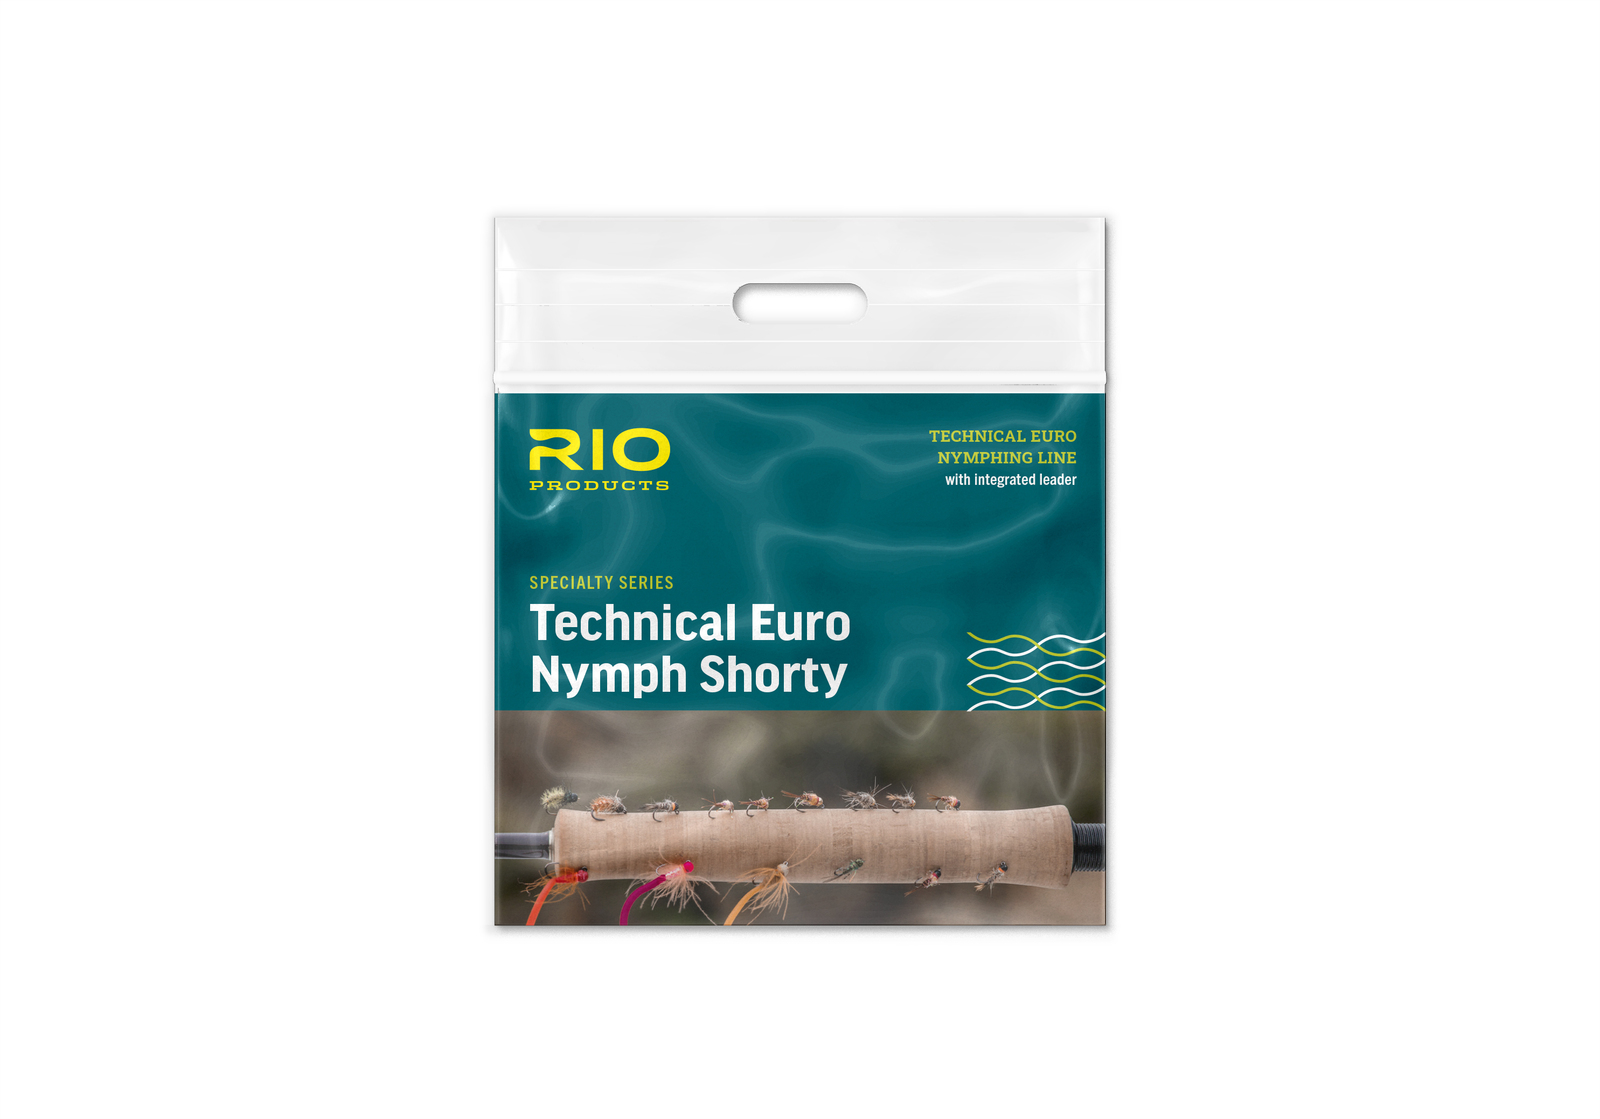 Rio Freshwater Specialty Series Technical Euro Nymph Shorty Fly Line · WF · 2-5wt · Floating · Yellow - Pink